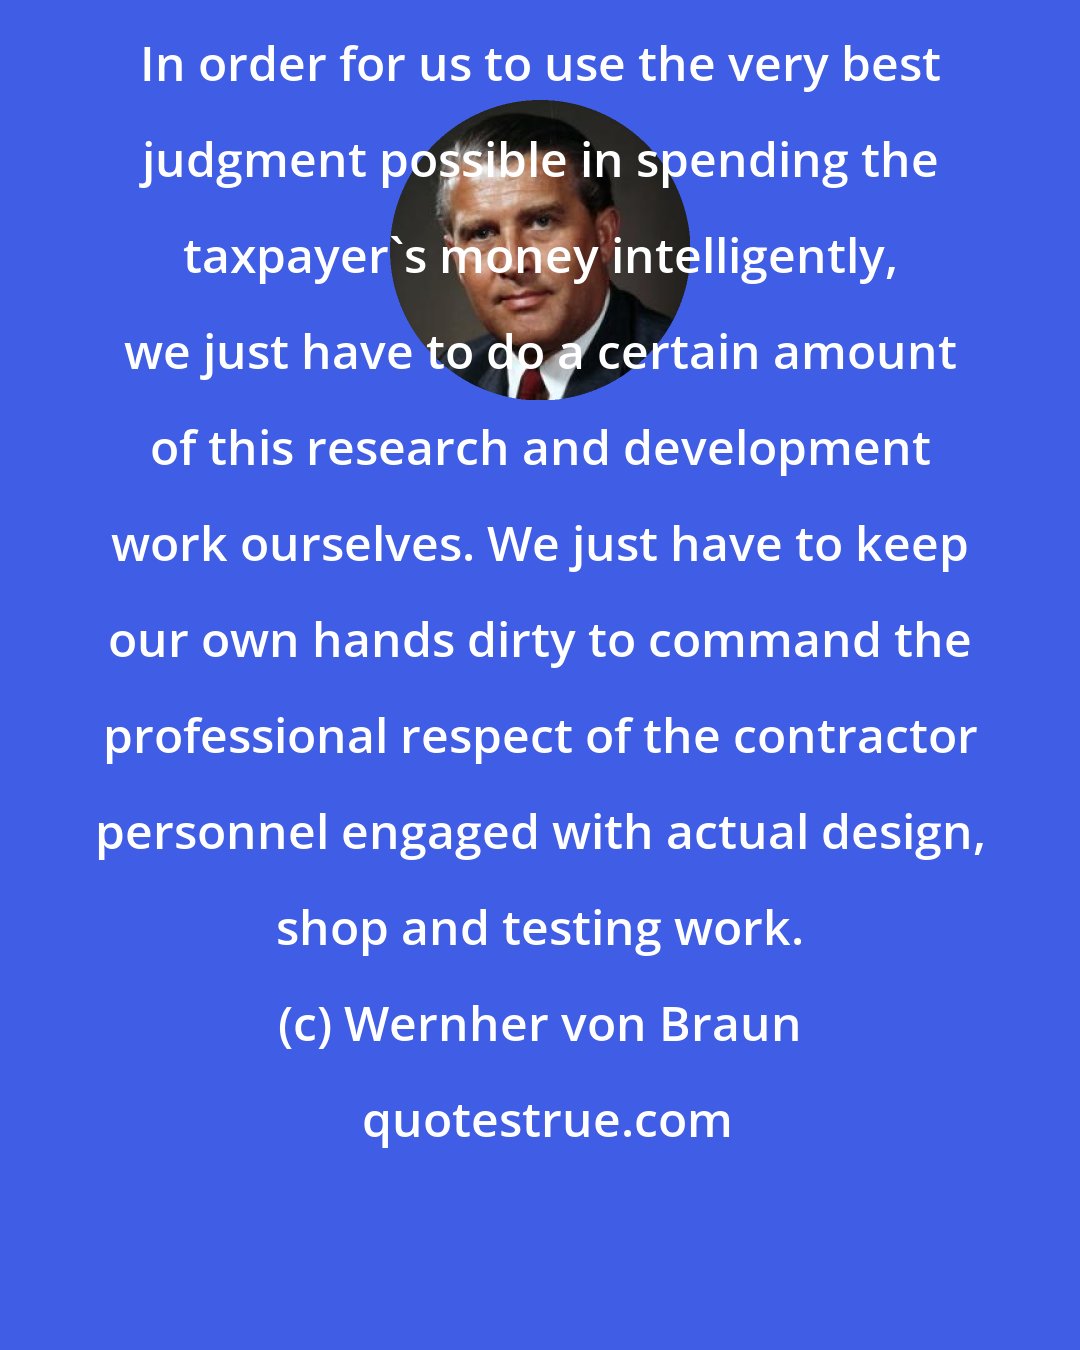 Wernher von Braun: In order for us to use the very best judgment possible in spending the taxpayer's money intelligently, we just have to do a certain amount of this research and development work ourselves. We just have to keep our own hands dirty to command the professional respect of the contractor personnel engaged with actual design, shop and testing work.